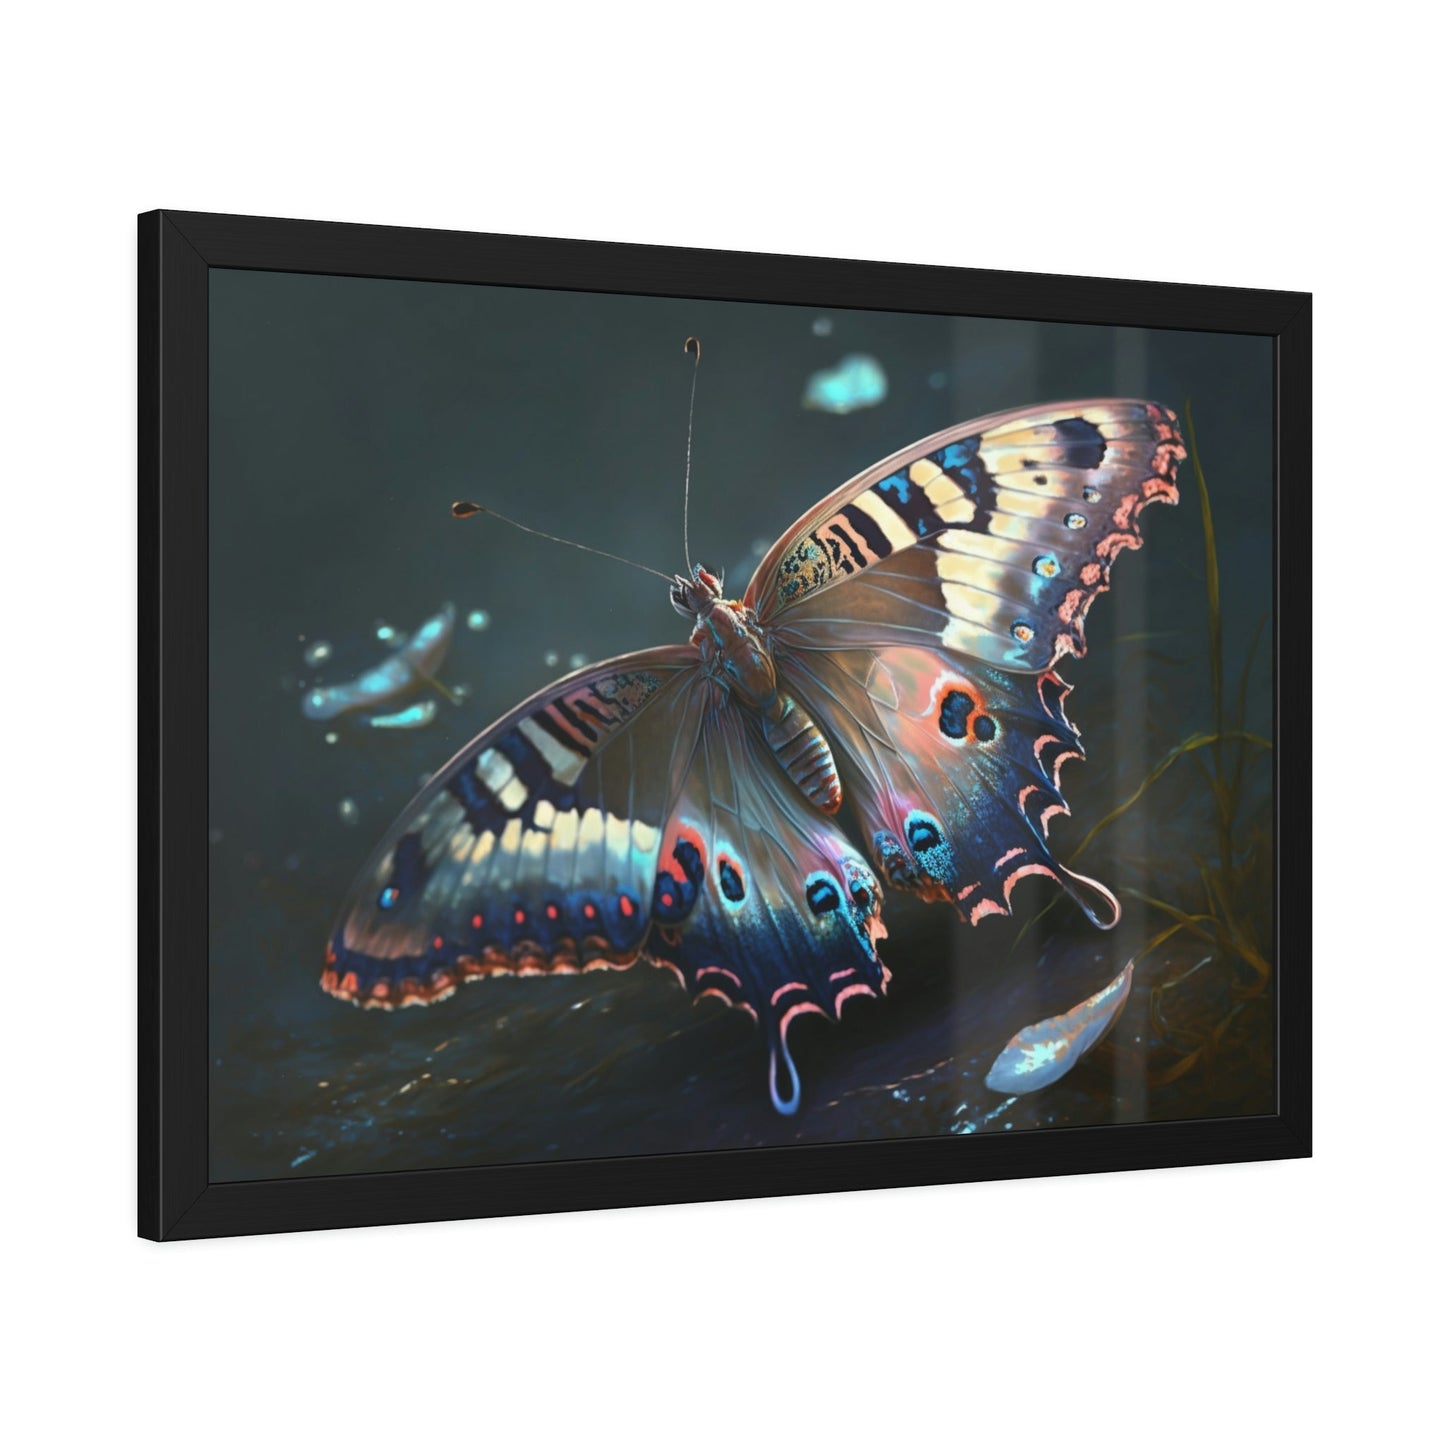 The Lone Butterfly: Natural Canvas & Poster Print of Delicate Wings